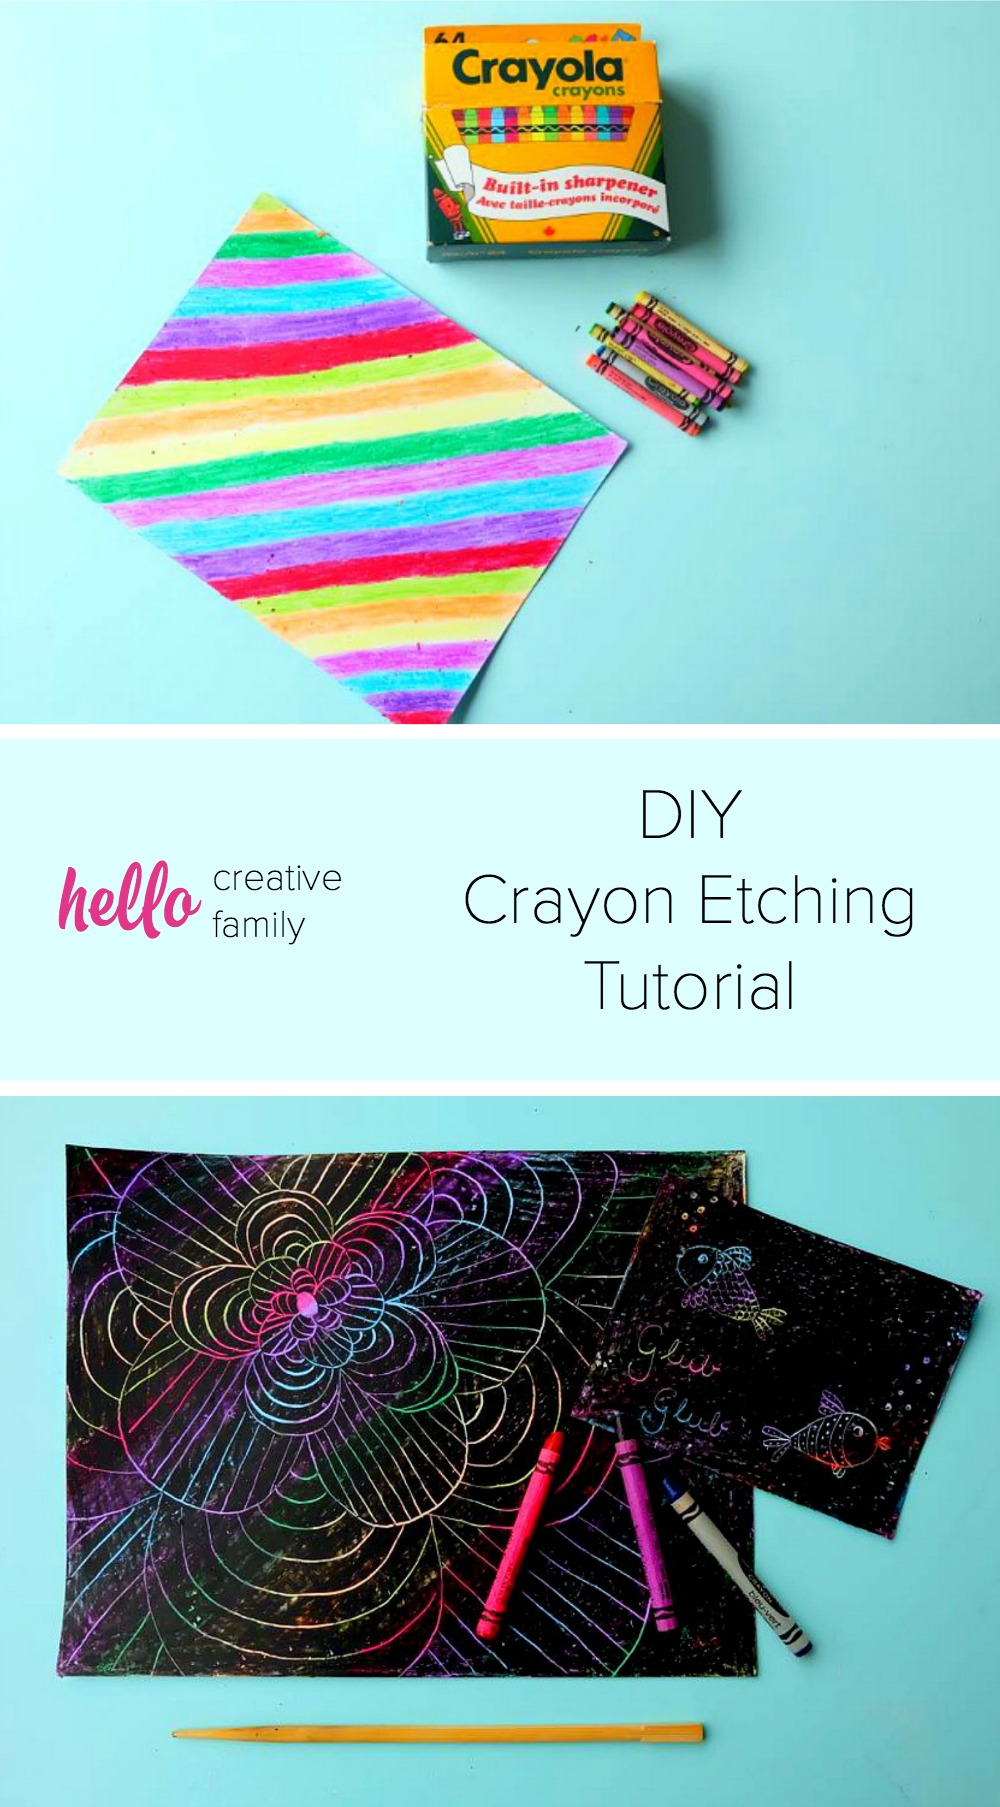 Do you remember doing crayon etching as a kid? It used to be one of our favorite kids crafts! Make this simple, colorful art with your kids with this easy tutorial. All you need is a box of crayons, paper and a chopstick! 